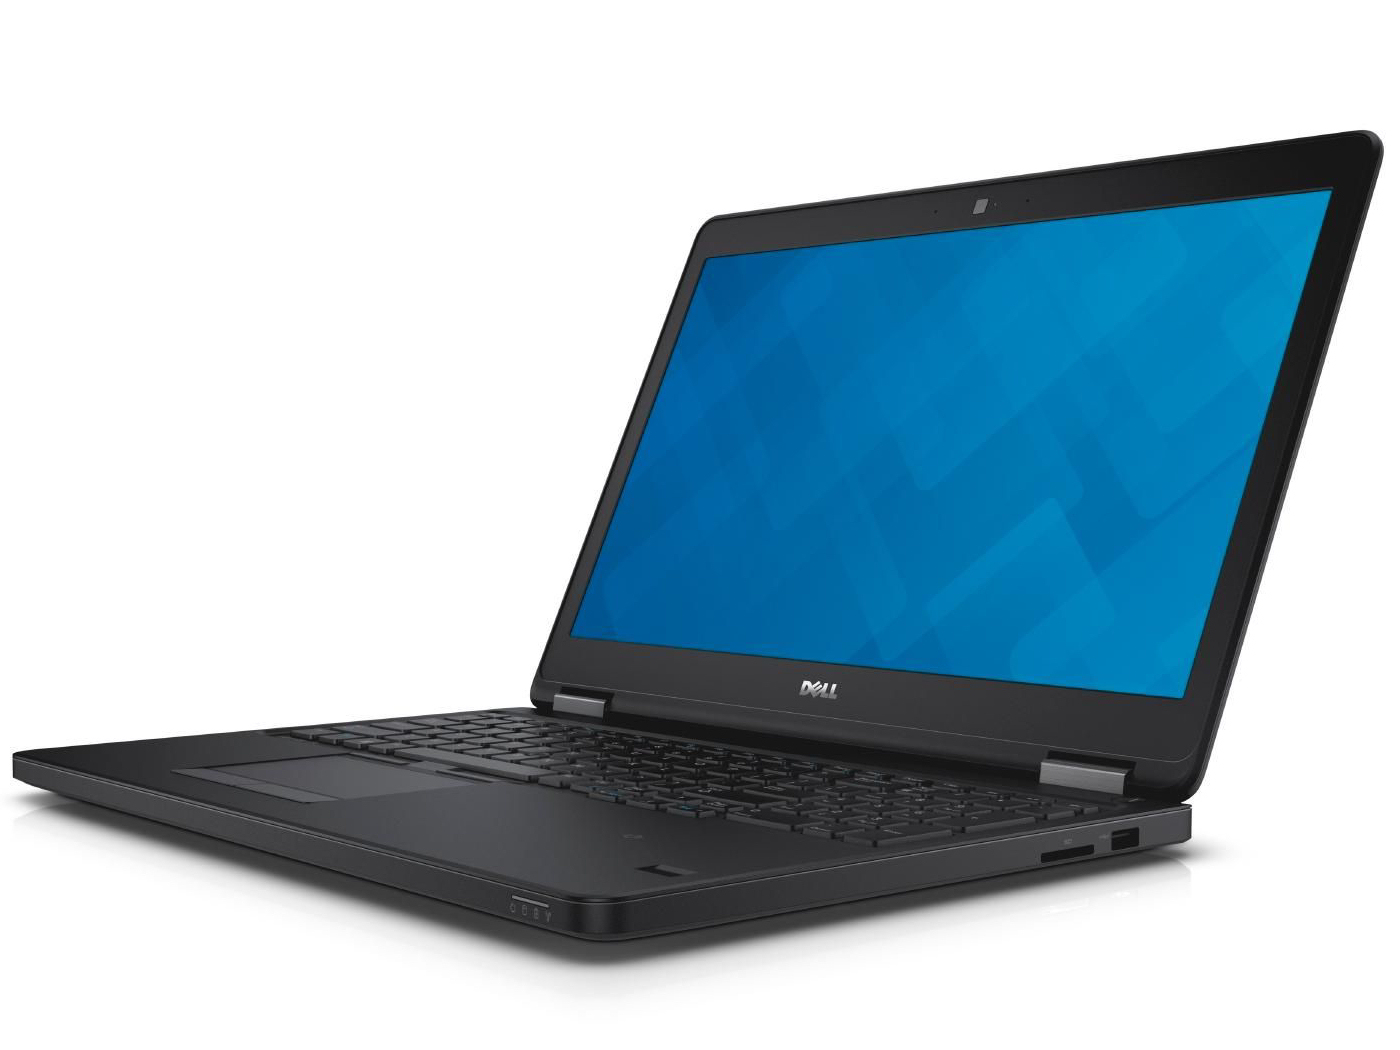 Dell Latitude E5550 (Broadwell) Notebook Review Update